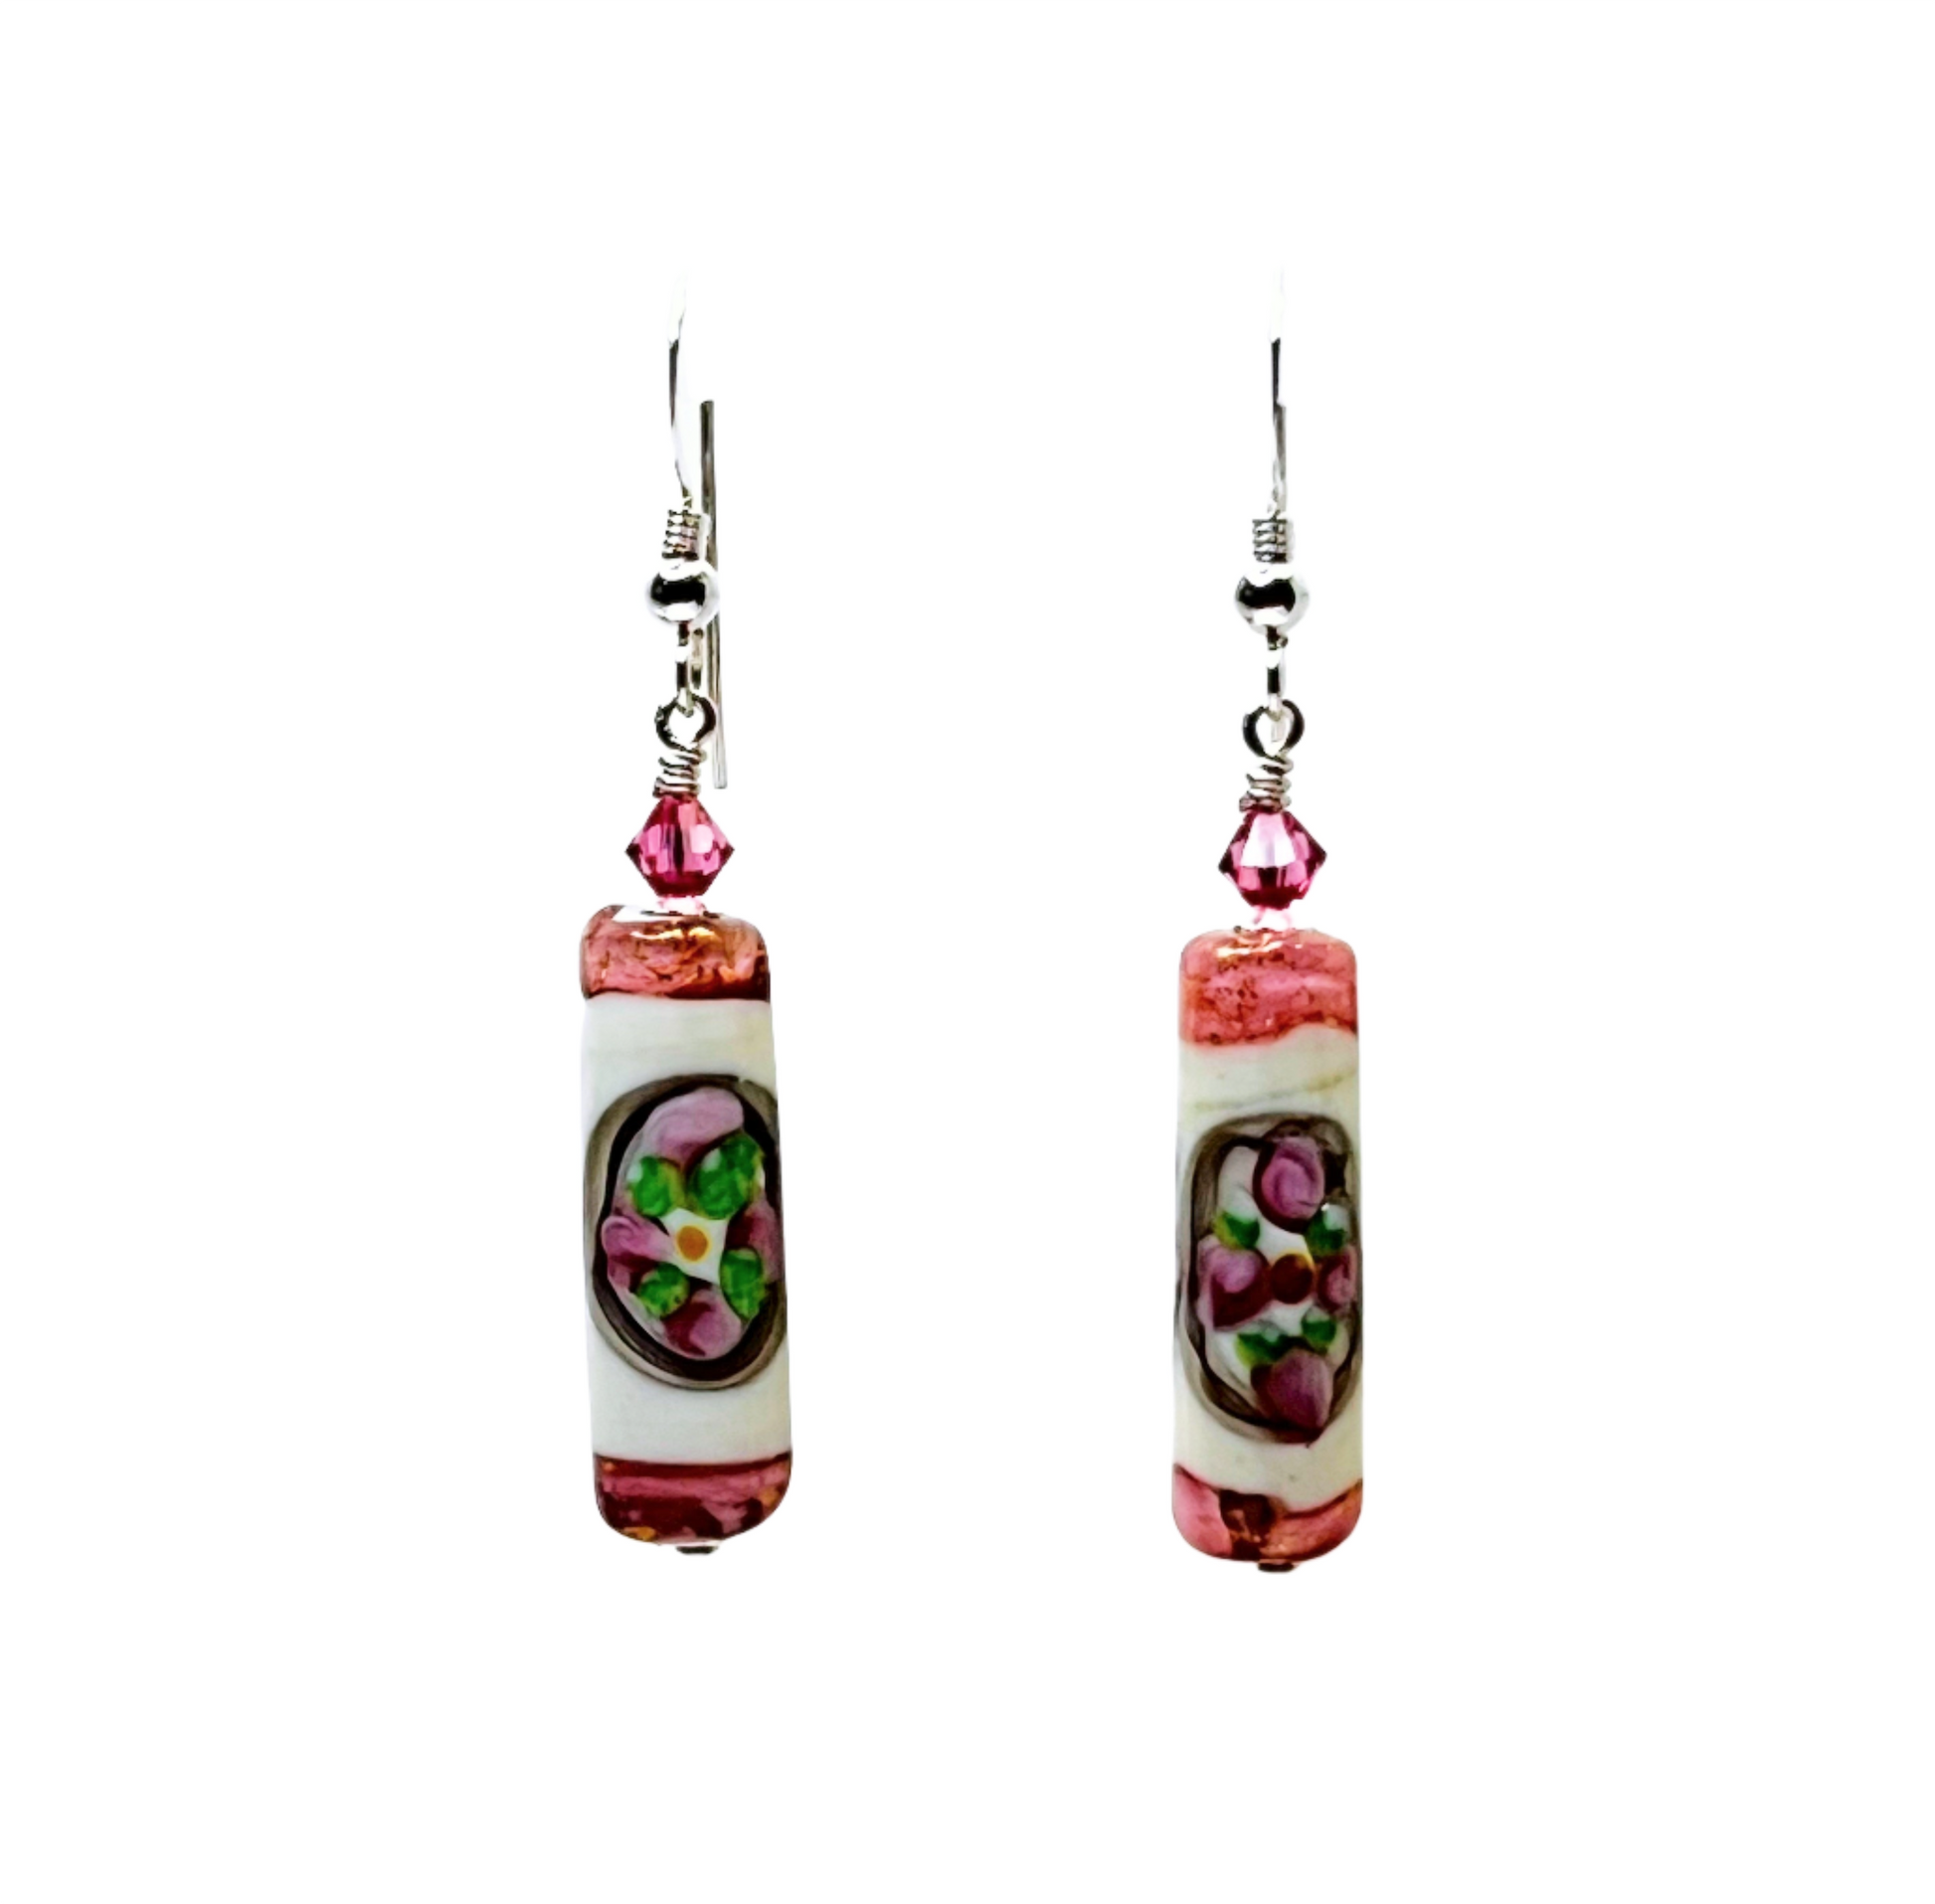 a pair of pink and green glass earrings